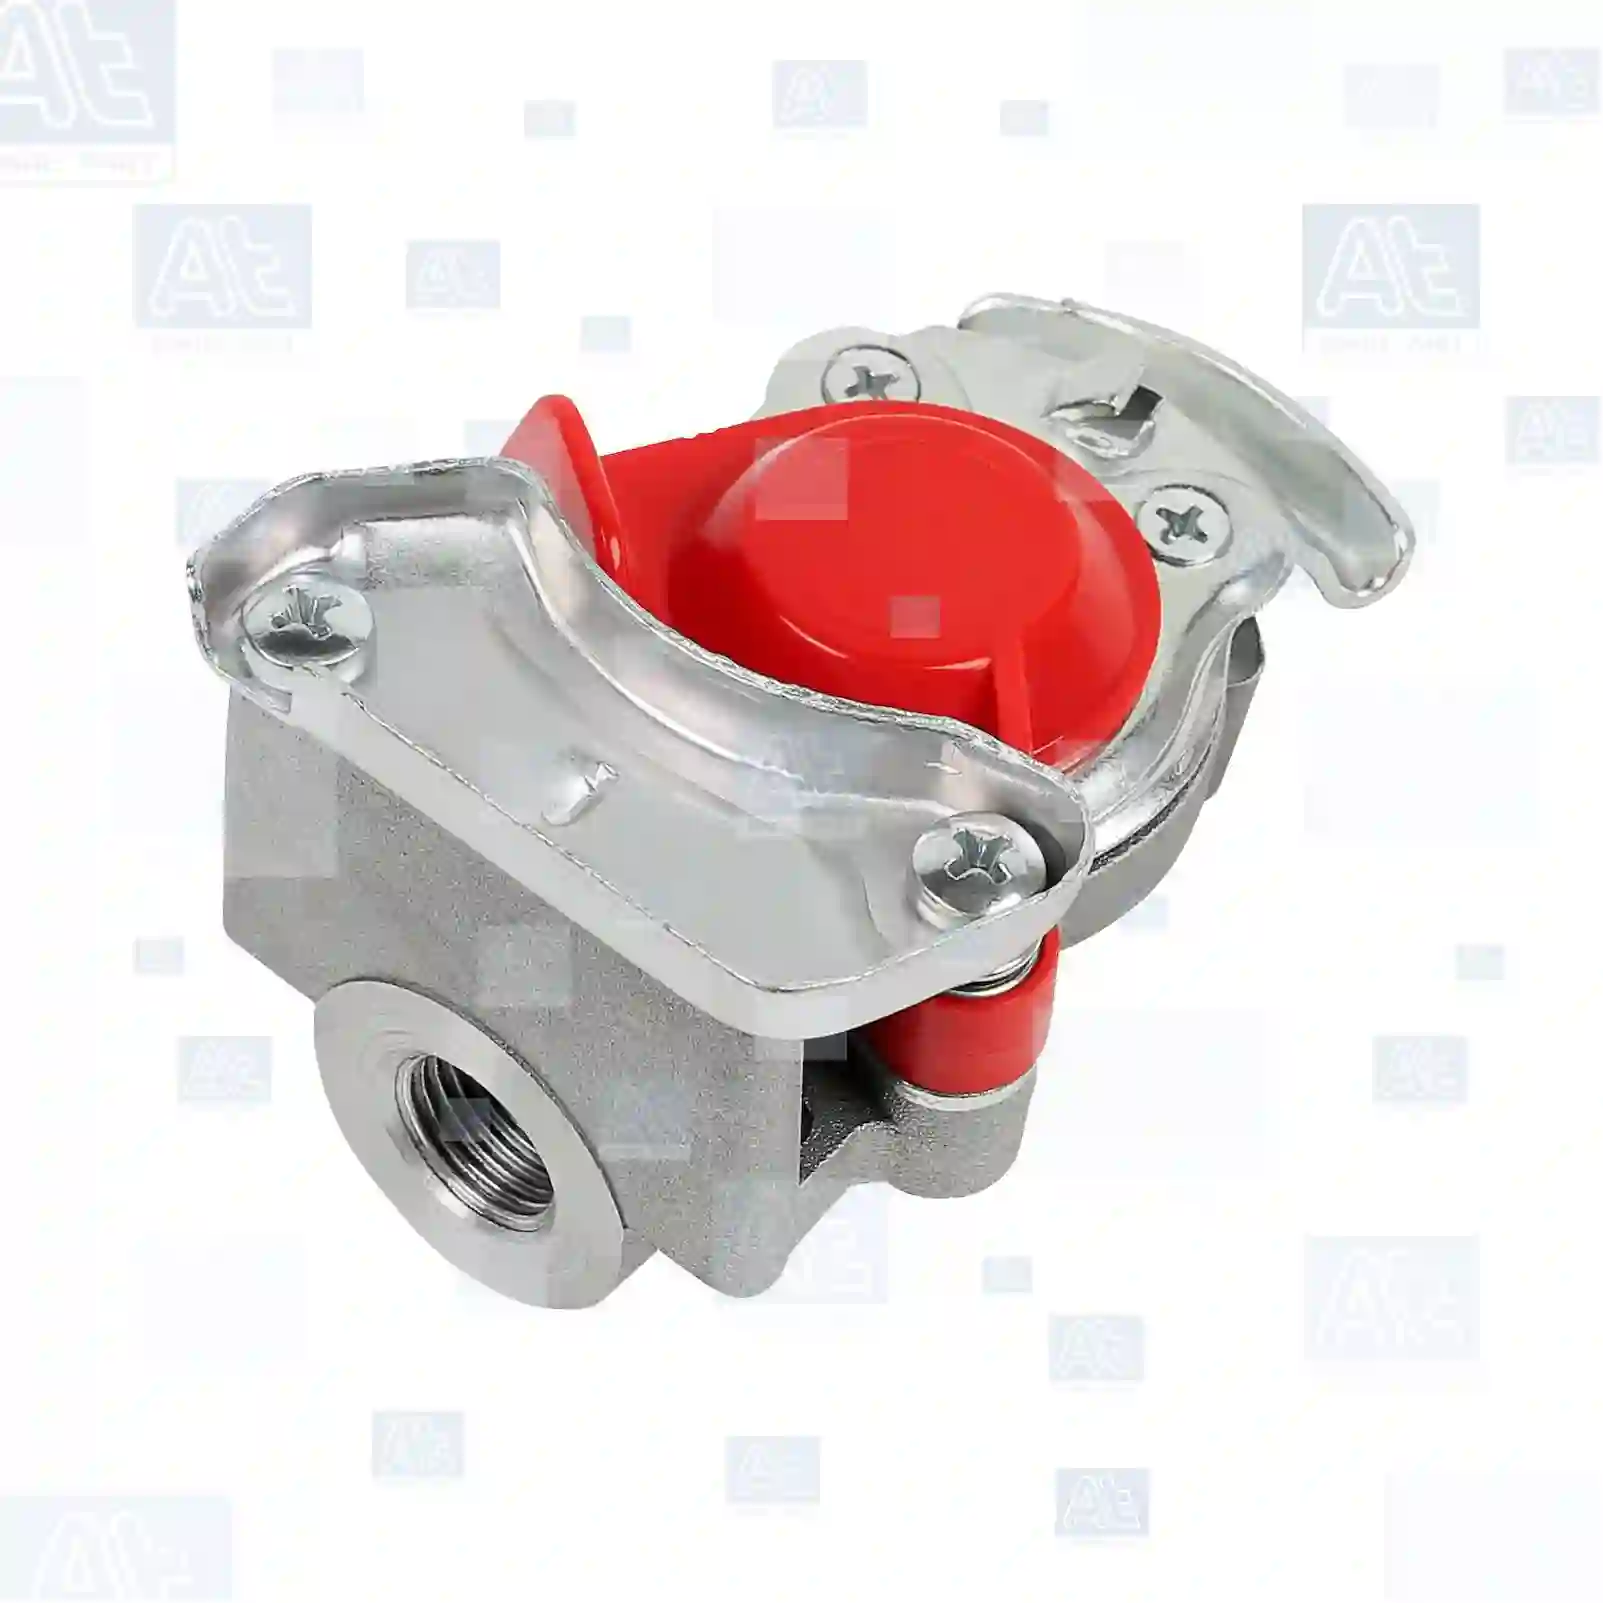 Palm coupling, red lid, at no 77714419, oem no: 0218240300, 1506435, ACU8711, 150881, 41035633, 5006210386, 60135772, 61259650, 500945012, 945012, 502925901, 502965108, 502998401, 81512206049, 81512206072, 81512206075, 81512206115, 81512206134, 0004297630, 0004297730, 011017295, 110172950, 110229700, F001017, 0037534600, 5000095034, 5000608011, 5021170409, 4425012100, 1112485, 20167485, 330301, 051424, 8285191000, ZG50552-0008 At Spare Part | Engine, Accelerator Pedal, Camshaft, Connecting Rod, Crankcase, Crankshaft, Cylinder Head, Engine Suspension Mountings, Exhaust Manifold, Exhaust Gas Recirculation, Filter Kits, Flywheel Housing, General Overhaul Kits, Engine, Intake Manifold, Oil Cleaner, Oil Cooler, Oil Filter, Oil Pump, Oil Sump, Piston & Liner, Sensor & Switch, Timing Case, Turbocharger, Cooling System, Belt Tensioner, Coolant Filter, Coolant Pipe, Corrosion Prevention Agent, Drive, Expansion Tank, Fan, Intercooler, Monitors & Gauges, Radiator, Thermostat, V-Belt / Timing belt, Water Pump, Fuel System, Electronical Injector Unit, Feed Pump, Fuel Filter, cpl., Fuel Gauge Sender,  Fuel Line, Fuel Pump, Fuel Tank, Injection Line Kit, Injection Pump, Exhaust System, Clutch & Pedal, Gearbox, Propeller Shaft, Axles, Brake System, Hubs & Wheels, Suspension, Leaf Spring, Universal Parts / Accessories, Steering, Electrical System, Cabin Palm coupling, red lid, at no 77714419, oem no: 0218240300, 1506435, ACU8711, 150881, 41035633, 5006210386, 60135772, 61259650, 500945012, 945012, 502925901, 502965108, 502998401, 81512206049, 81512206072, 81512206075, 81512206115, 81512206134, 0004297630, 0004297730, 011017295, 110172950, 110229700, F001017, 0037534600, 5000095034, 5000608011, 5021170409, 4425012100, 1112485, 20167485, 330301, 051424, 8285191000, ZG50552-0008 At Spare Part | Engine, Accelerator Pedal, Camshaft, Connecting Rod, Crankcase, Crankshaft, Cylinder Head, Engine Suspension Mountings, Exhaust Manifold, Exhaust Gas Recirculation, Filter Kits, Flywheel Housing, General Overhaul Kits, Engine, Intake Manifold, Oil Cleaner, Oil Cooler, Oil Filter, Oil Pump, Oil Sump, Piston & Liner, Sensor & Switch, Timing Case, Turbocharger, Cooling System, Belt Tensioner, Coolant Filter, Coolant Pipe, Corrosion Prevention Agent, Drive, Expansion Tank, Fan, Intercooler, Monitors & Gauges, Radiator, Thermostat, V-Belt / Timing belt, Water Pump, Fuel System, Electronical Injector Unit, Feed Pump, Fuel Filter, cpl., Fuel Gauge Sender,  Fuel Line, Fuel Pump, Fuel Tank, Injection Line Kit, Injection Pump, Exhaust System, Clutch & Pedal, Gearbox, Propeller Shaft, Axles, Brake System, Hubs & Wheels, Suspension, Leaf Spring, Universal Parts / Accessories, Steering, Electrical System, Cabin